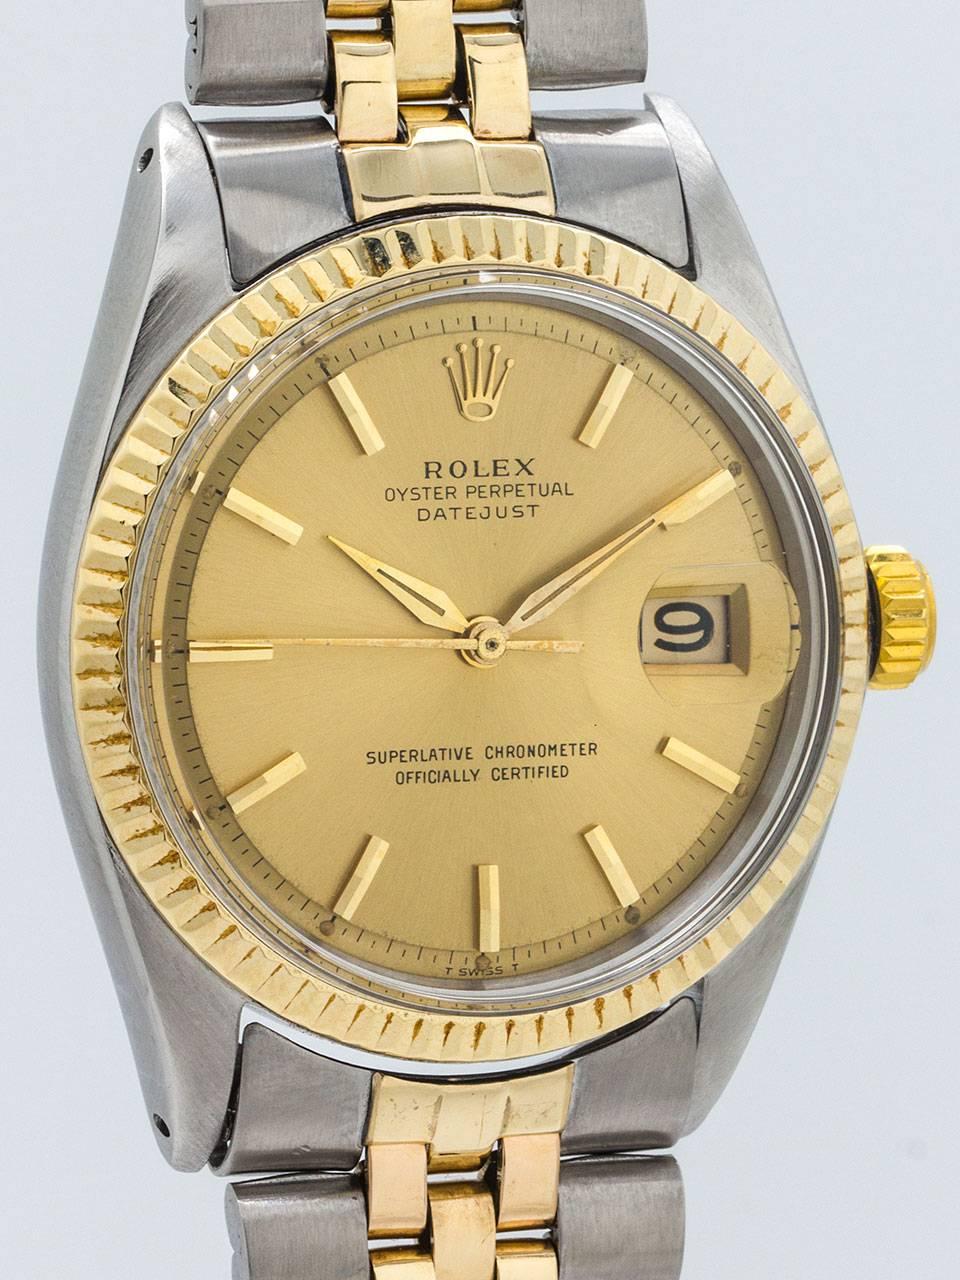 Rolex Stainless Steel and 14K Yellow Gold Oyster Perpetual Datejust ref 1601 serial number 1.03 million circa 1964. Man’s full size dress model 36mm diameter Oyster case. Featuring a 14K yellow gold fluted bezel, signed screw down gold crown and